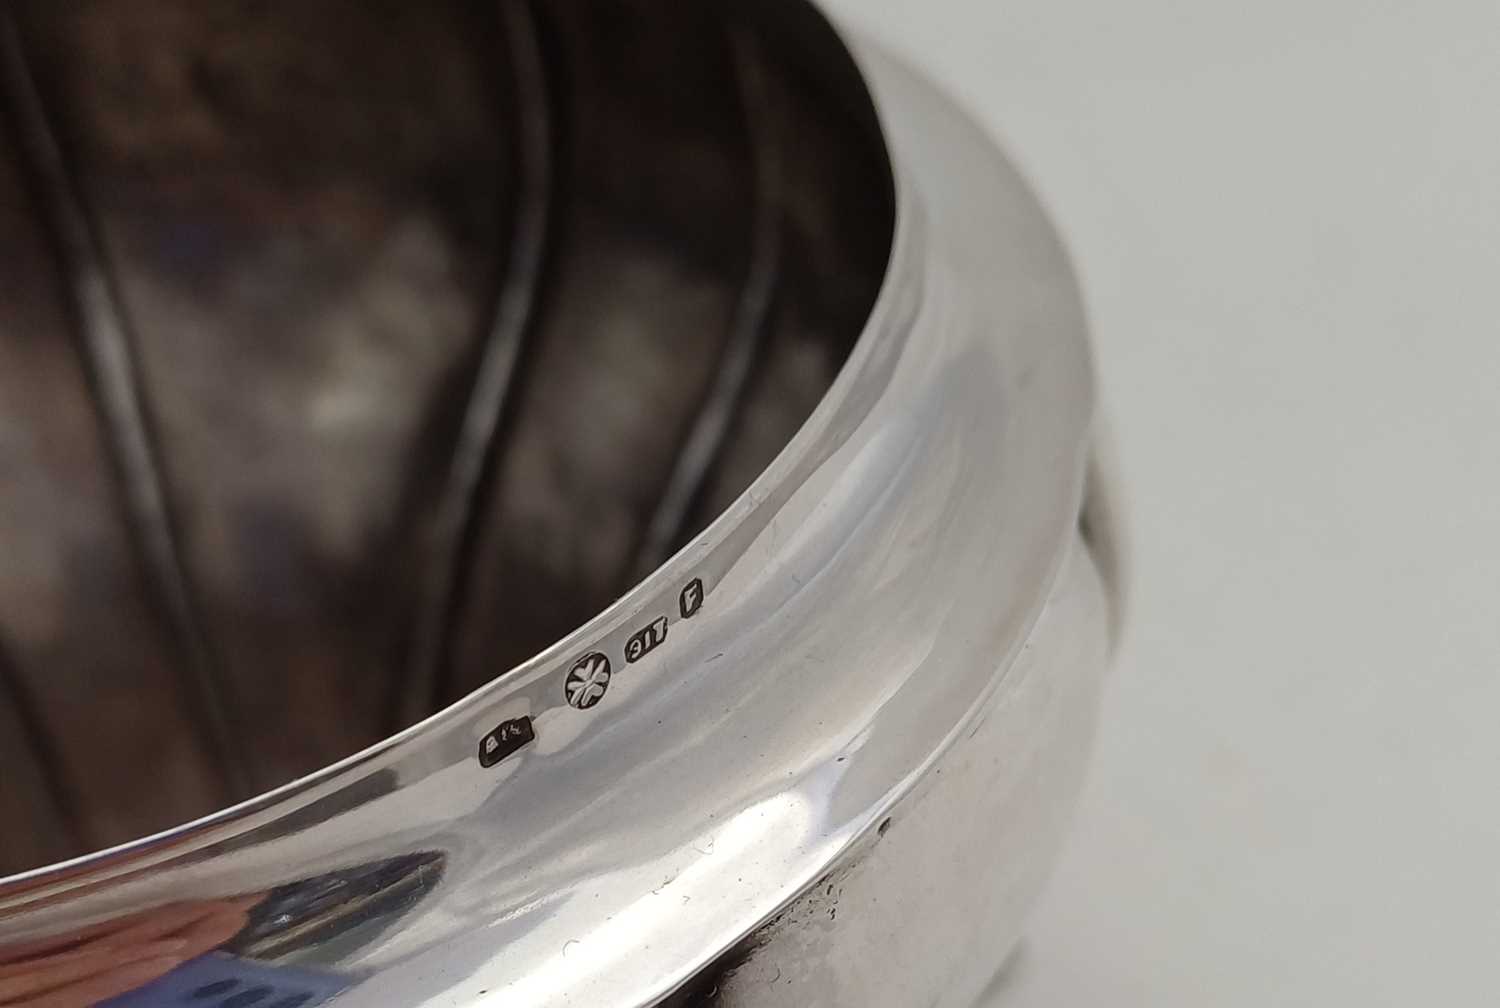 A Maltese Silver Sugar-Bowl and Cover, Maker's Mark Indistinct, 20th Century - Image 7 of 7